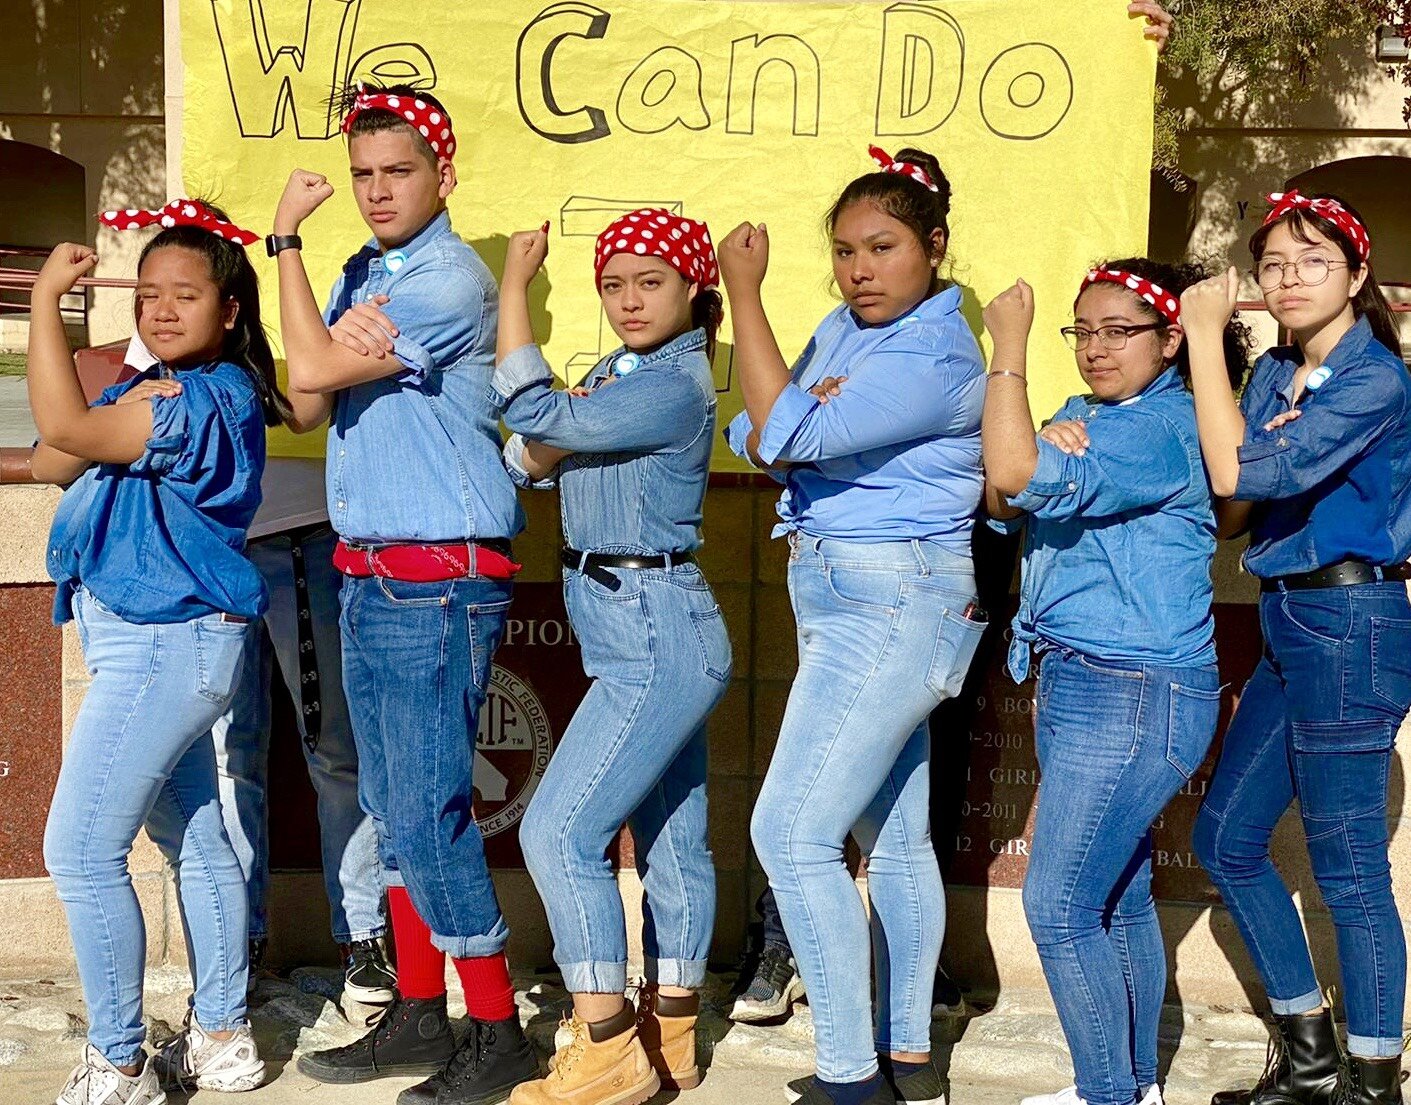 Downey High students draw inspiration from Rosie the Riveter - The Downey Patriot